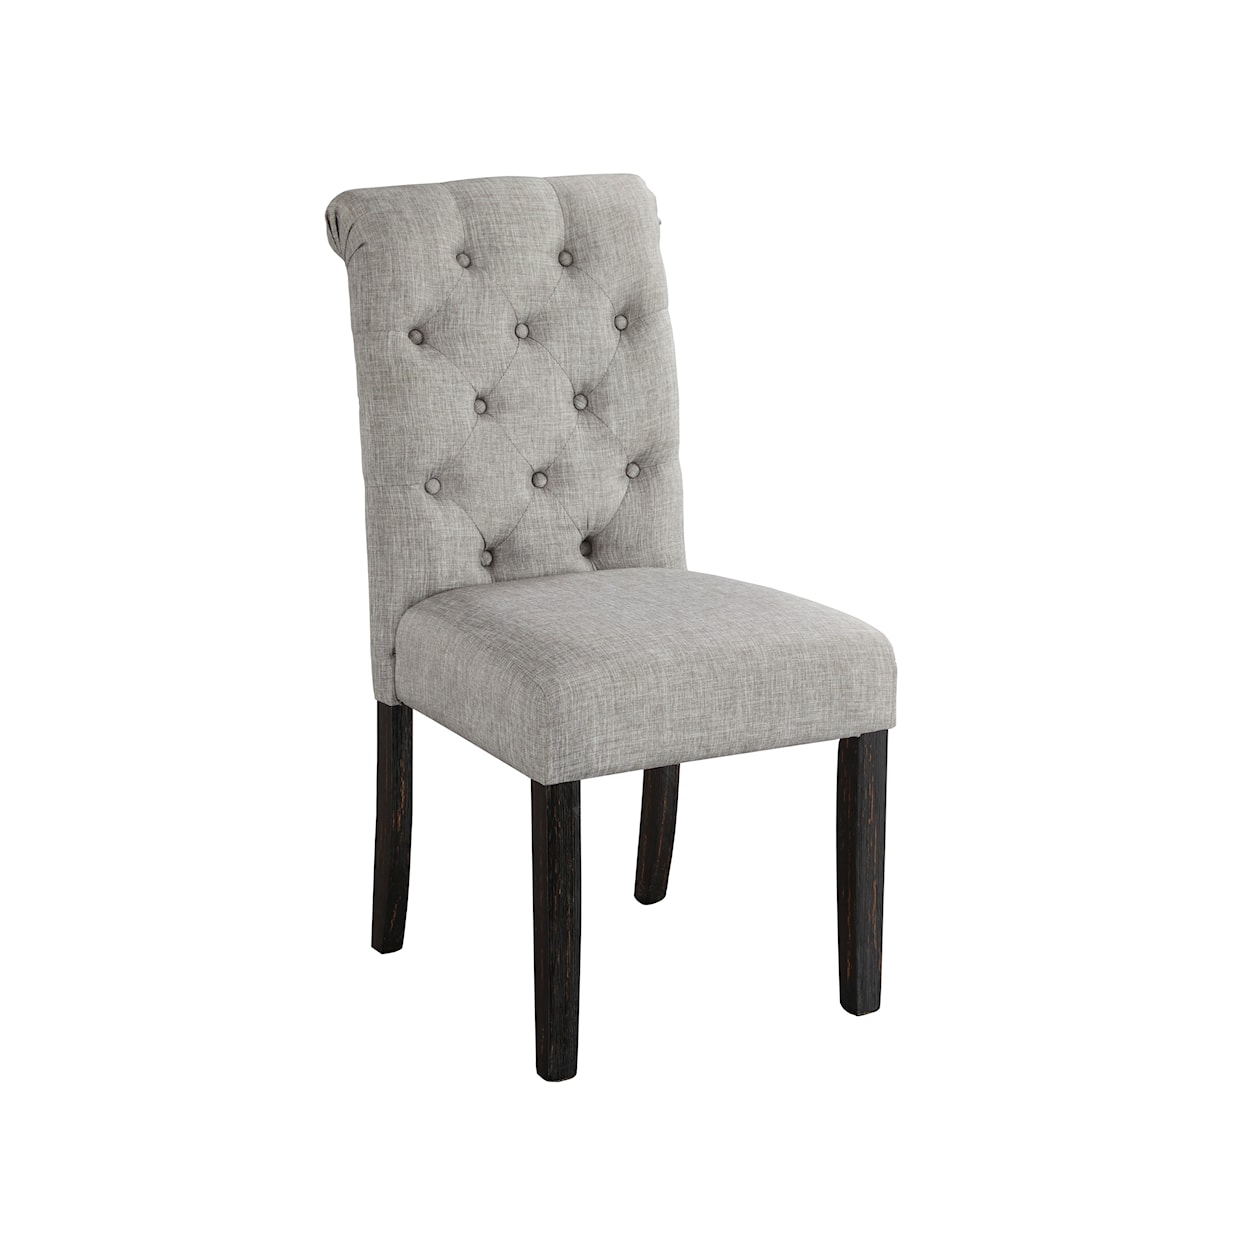 Signature Design by Ashley Broshound Dining Chair